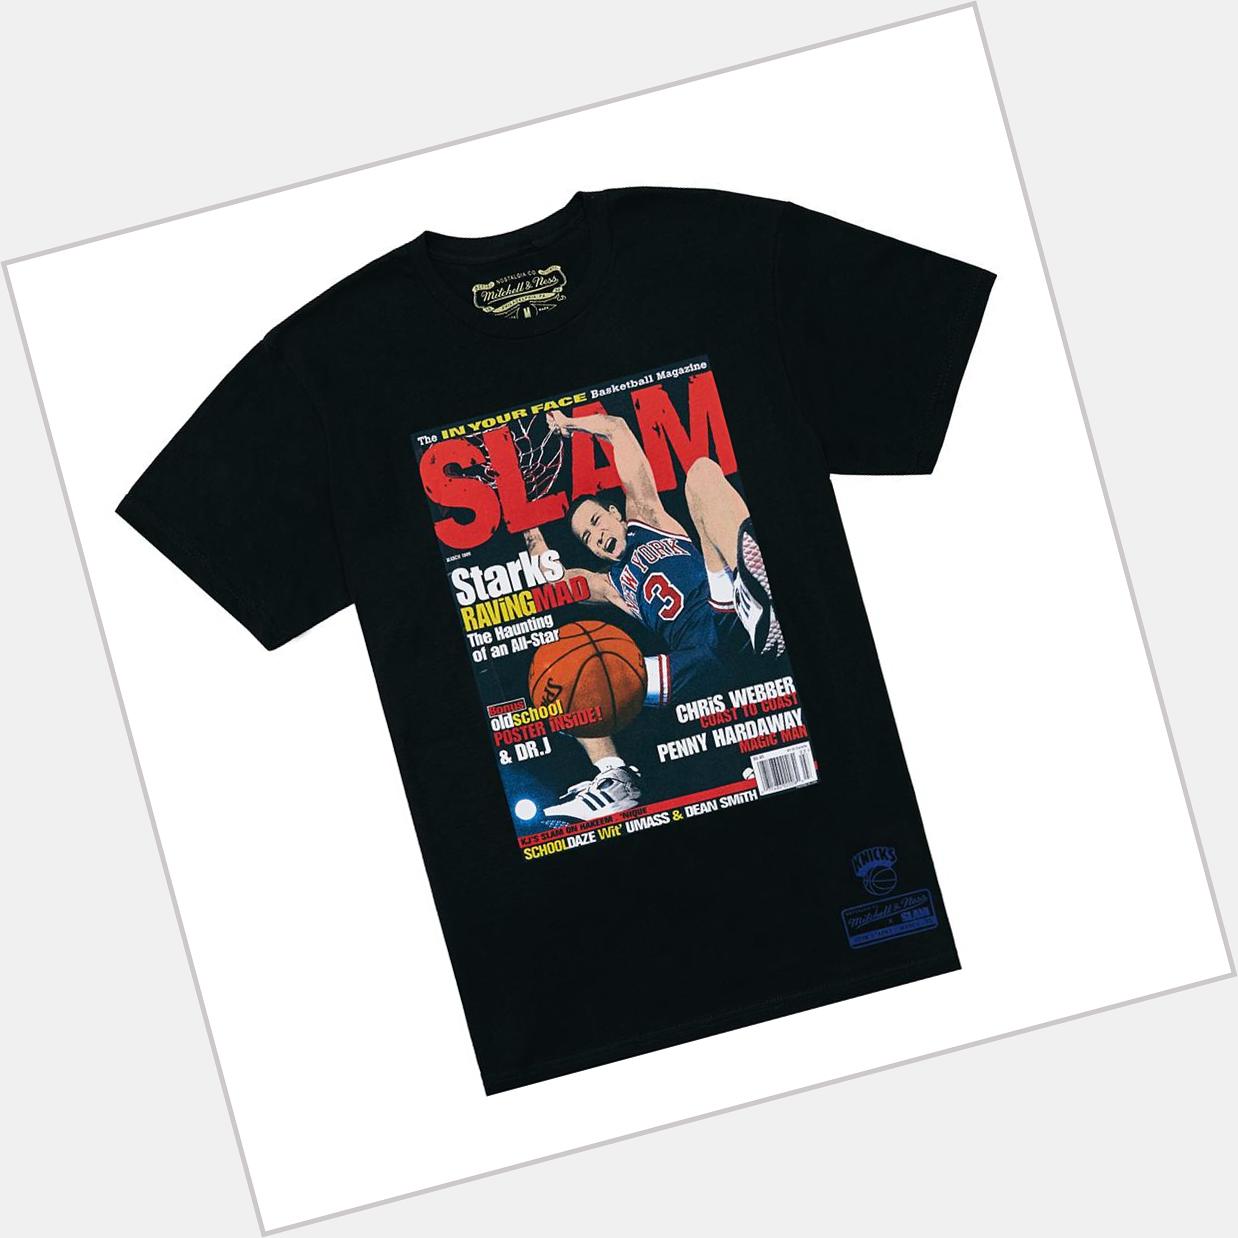 Happy birthday to John Starks. Celebrate the Knicks legend with his SLAM 4 cover tee. Link in bio. 